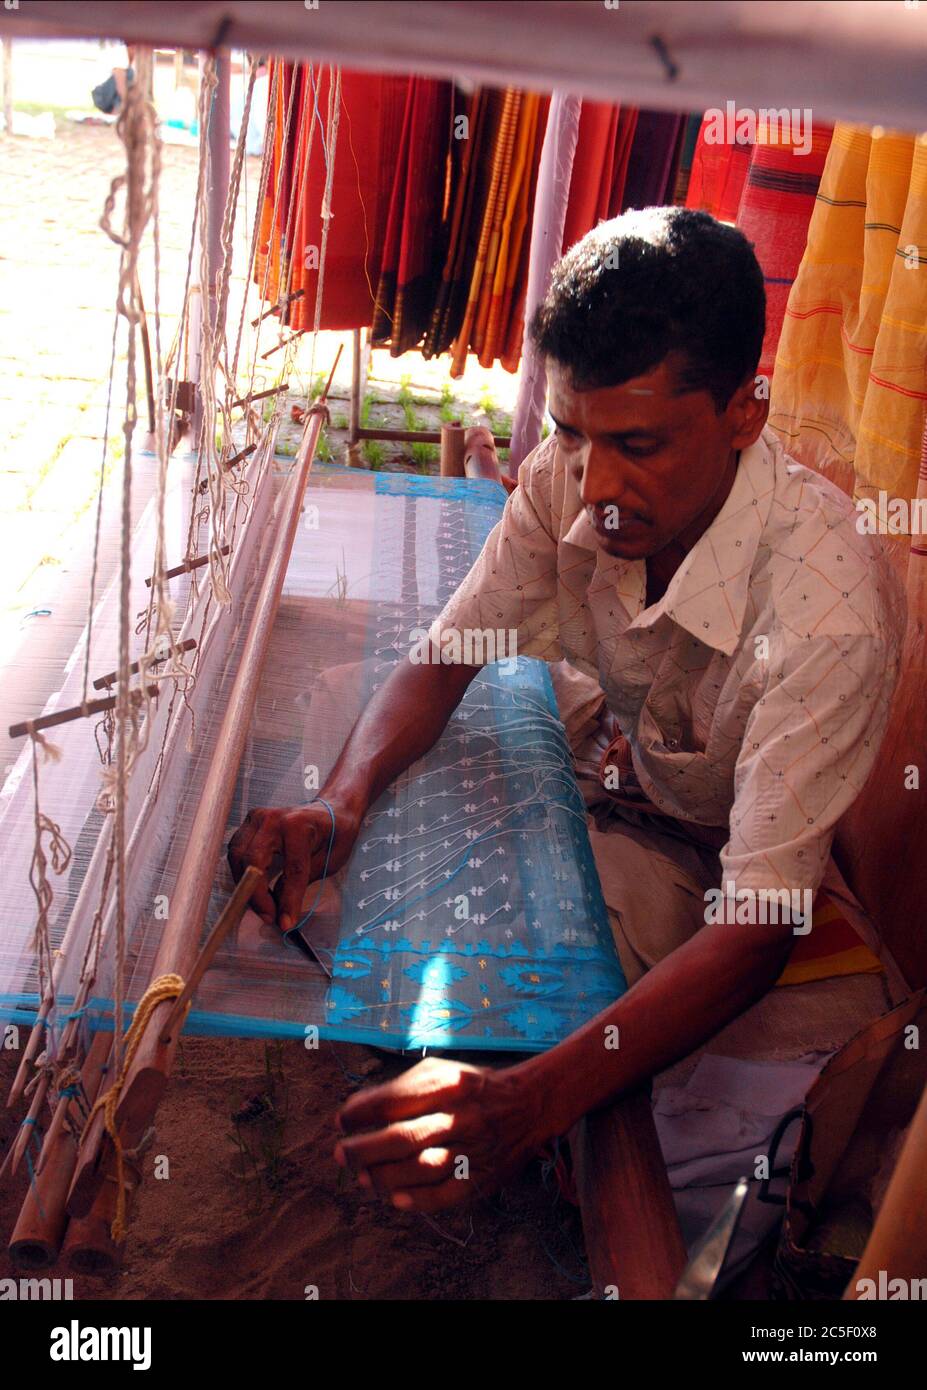 A weaver locally known as ‘Tanti’ weavs Jamdani saree, a popular women’s clothing, at  the Women’s fair in Chittagong. Jamdani is a superfine handloom Stock Photo